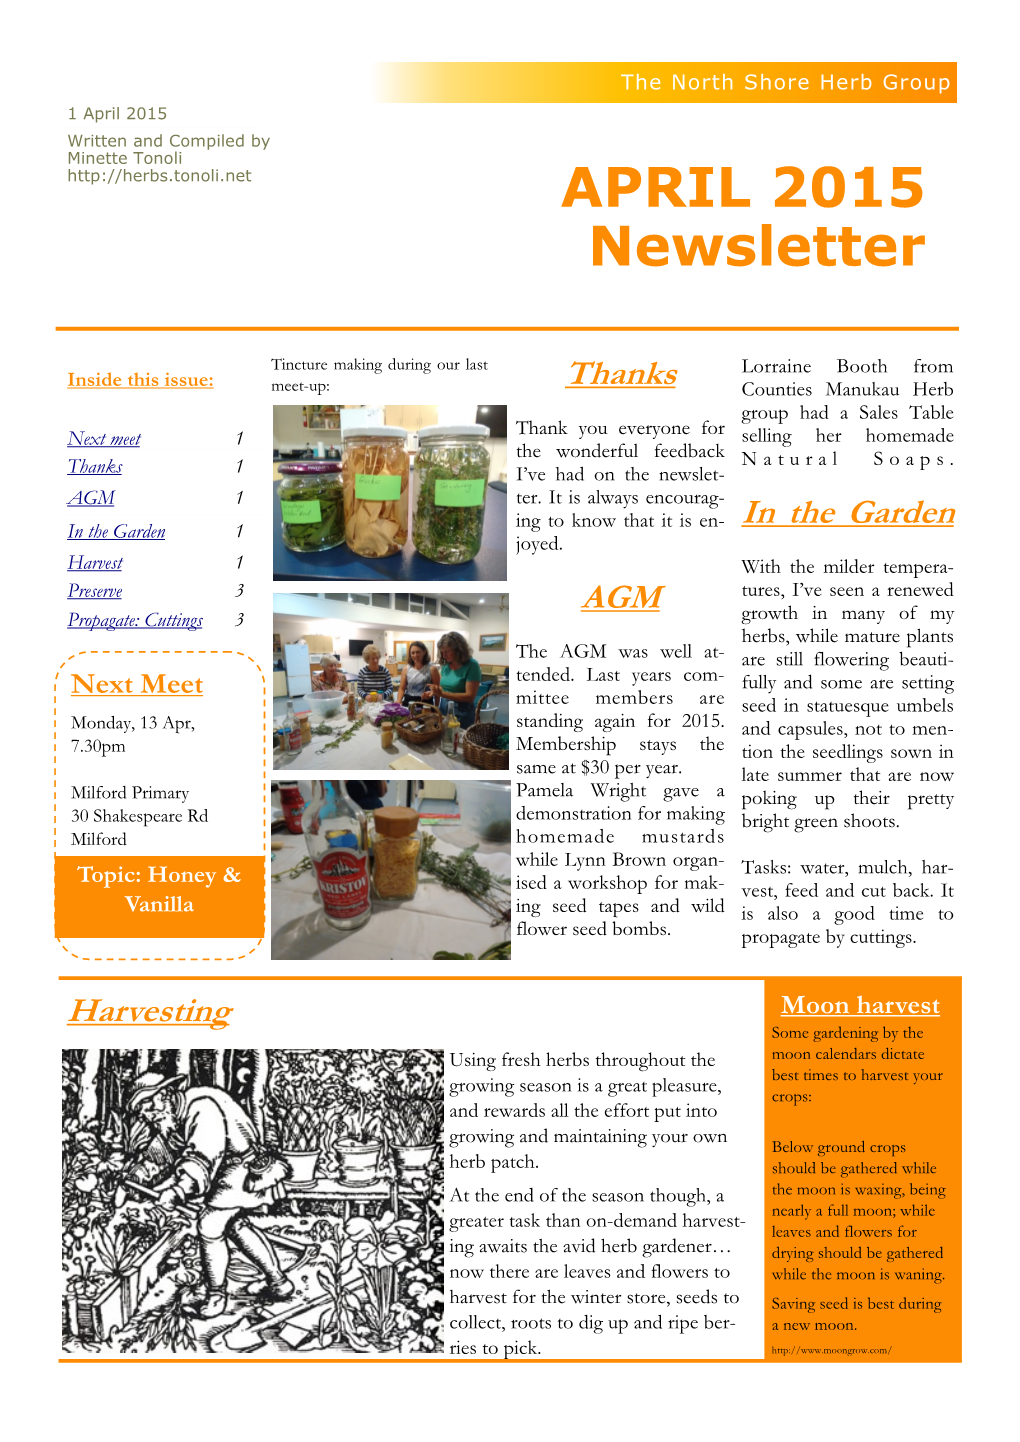 April 2015 Written and Compiled by Minette Tonoli APRIL 2015 Newsletter